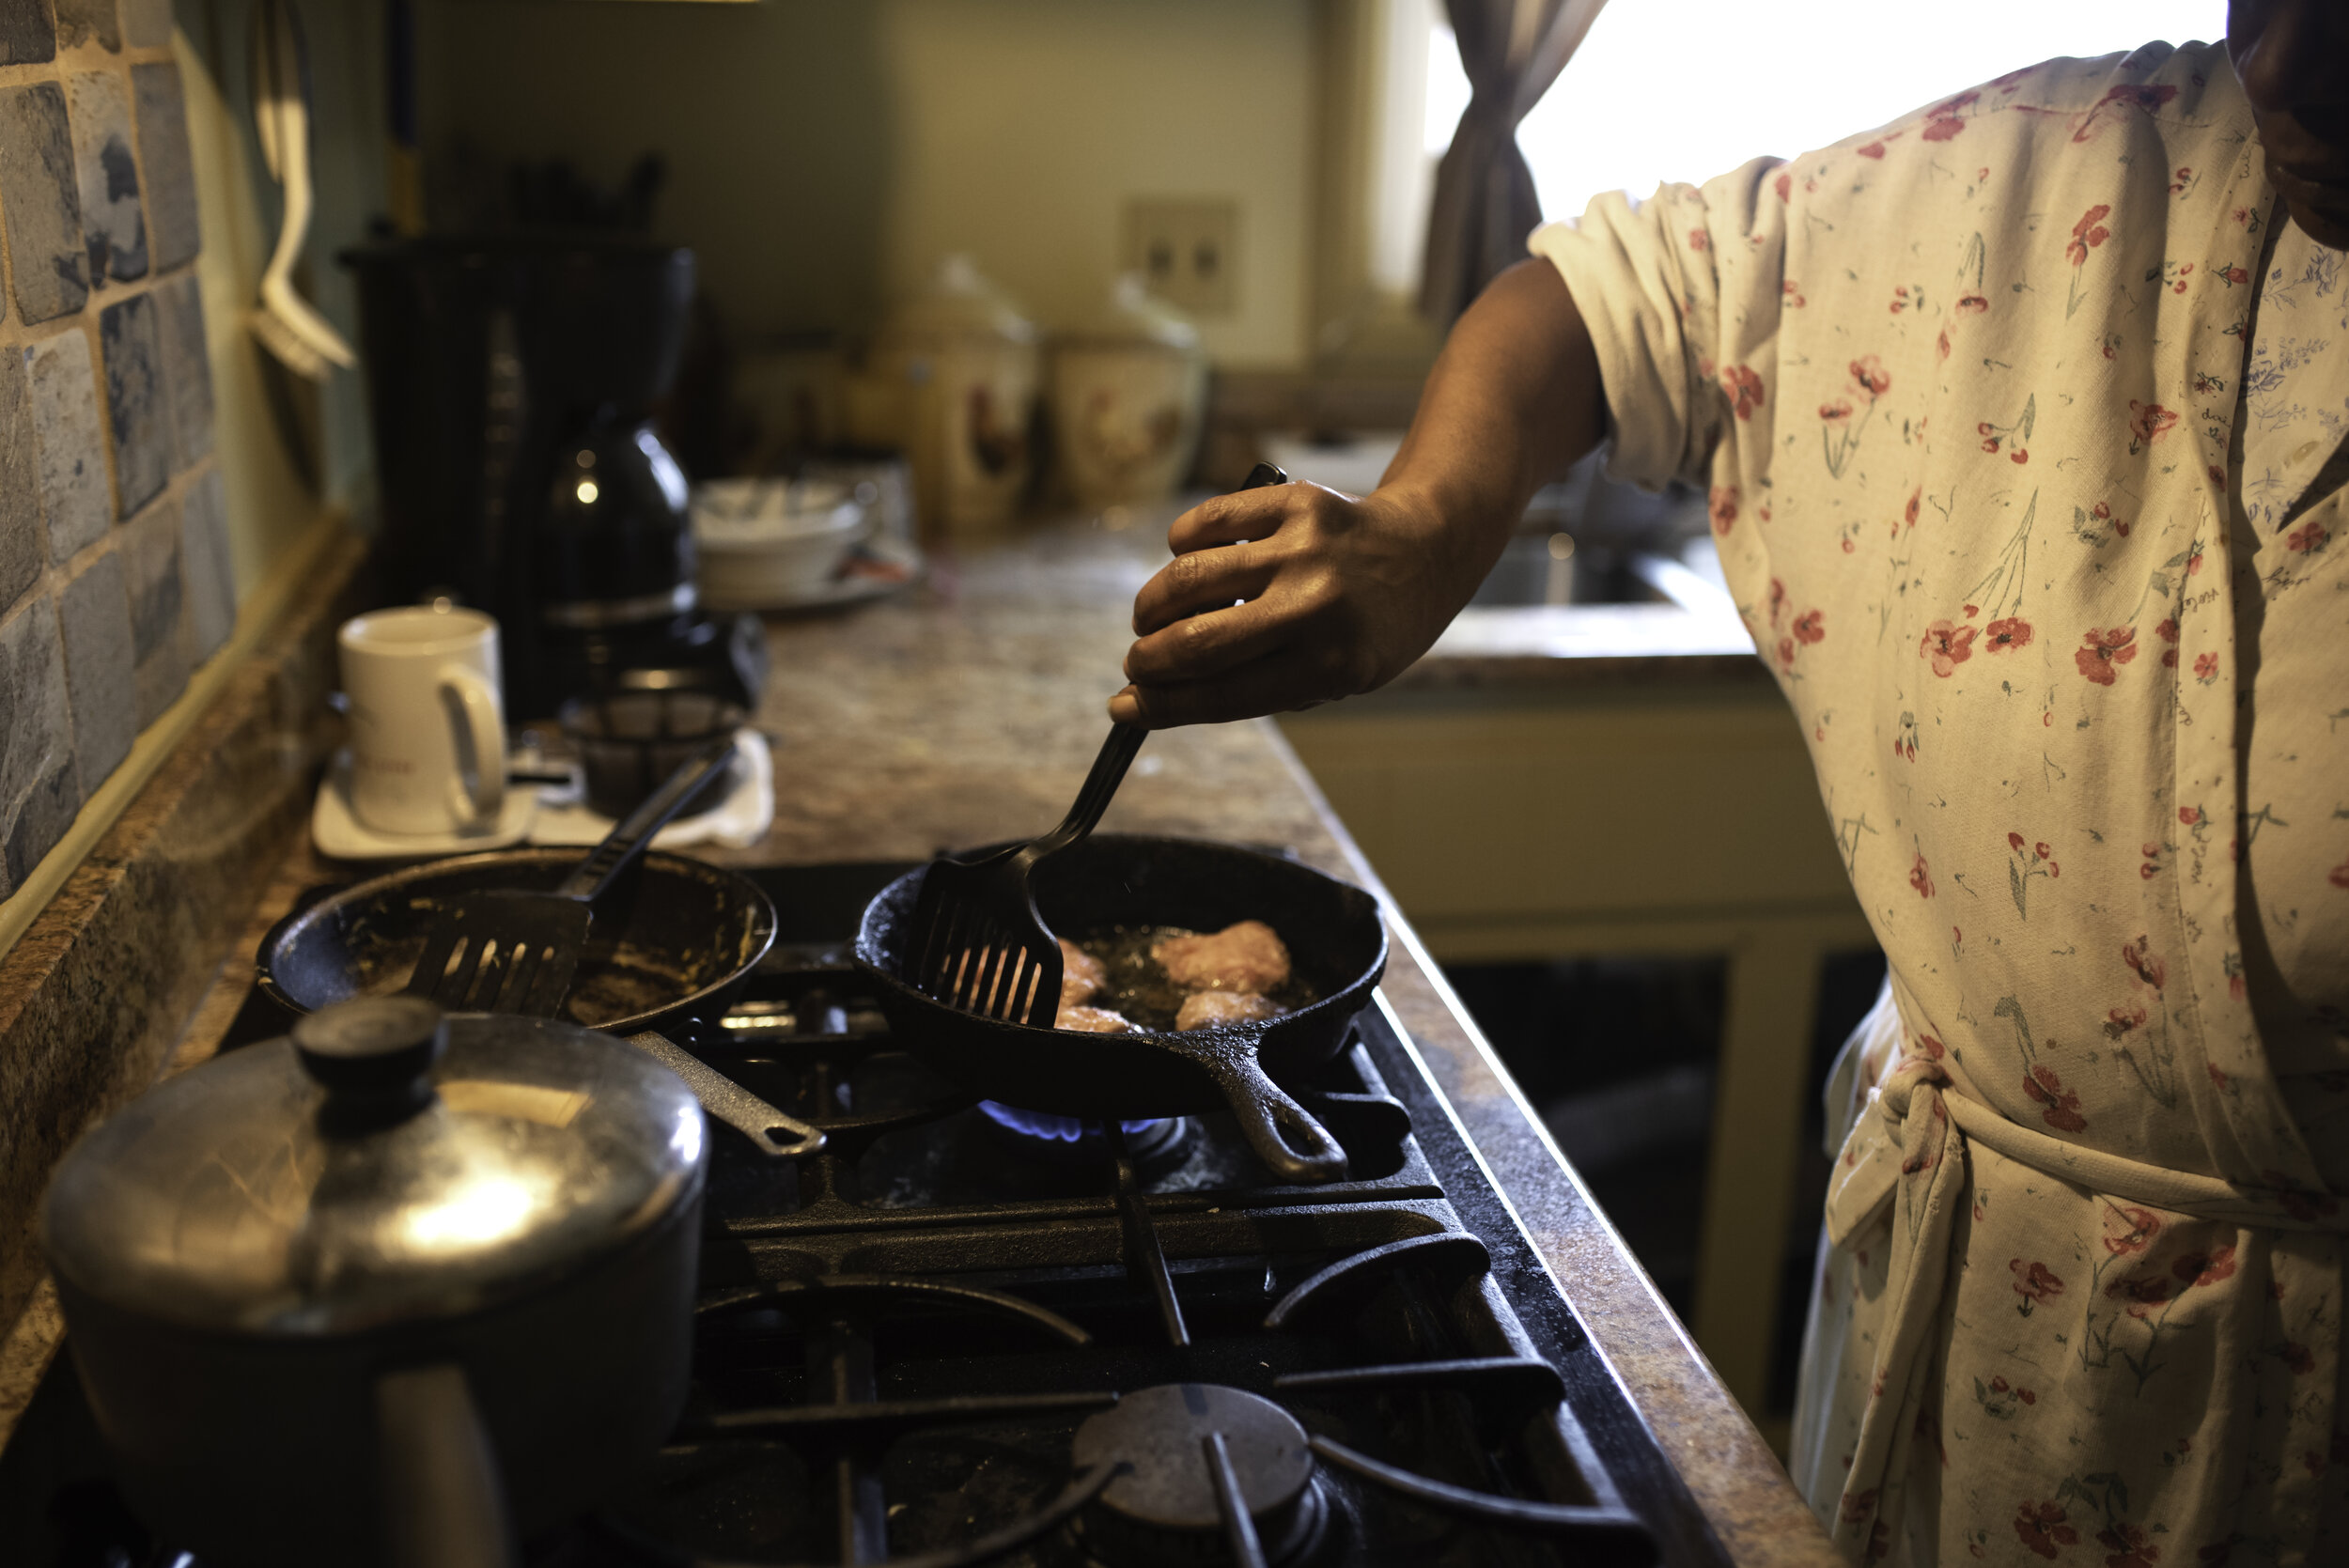   My mother, Michelle Nunn-Thomas, prepares a late brunch for my dad and I. This is something that’s routinely reserved for the weekend, but since she had time off work, it happening on a week day. (Southfield, MI on Wednesday, April 15, 2020)  